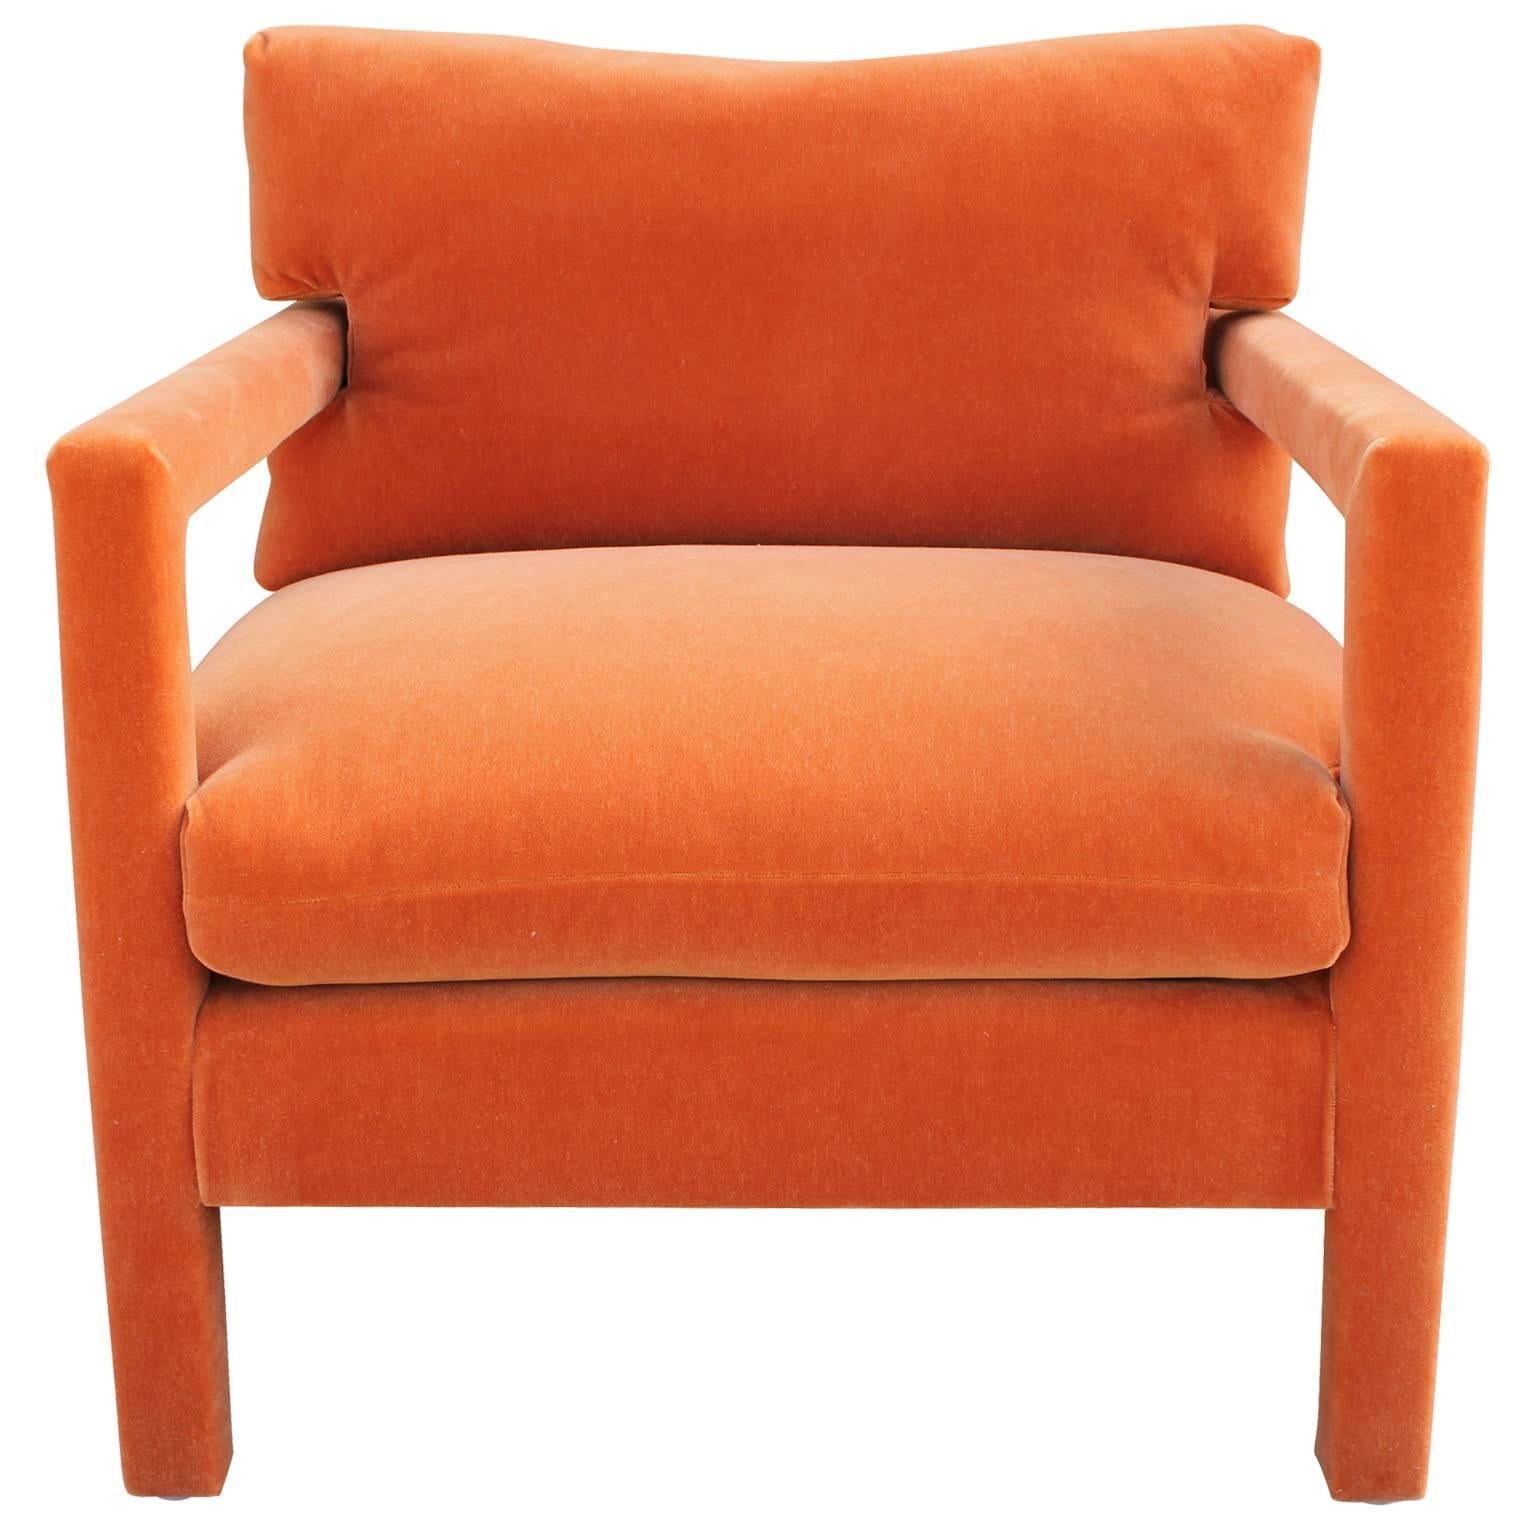 Beautiful pair of Parson style lounge chairs attributed Milo Baughman. Chairs are freshly upholstered in melon orange mohair velvet. 